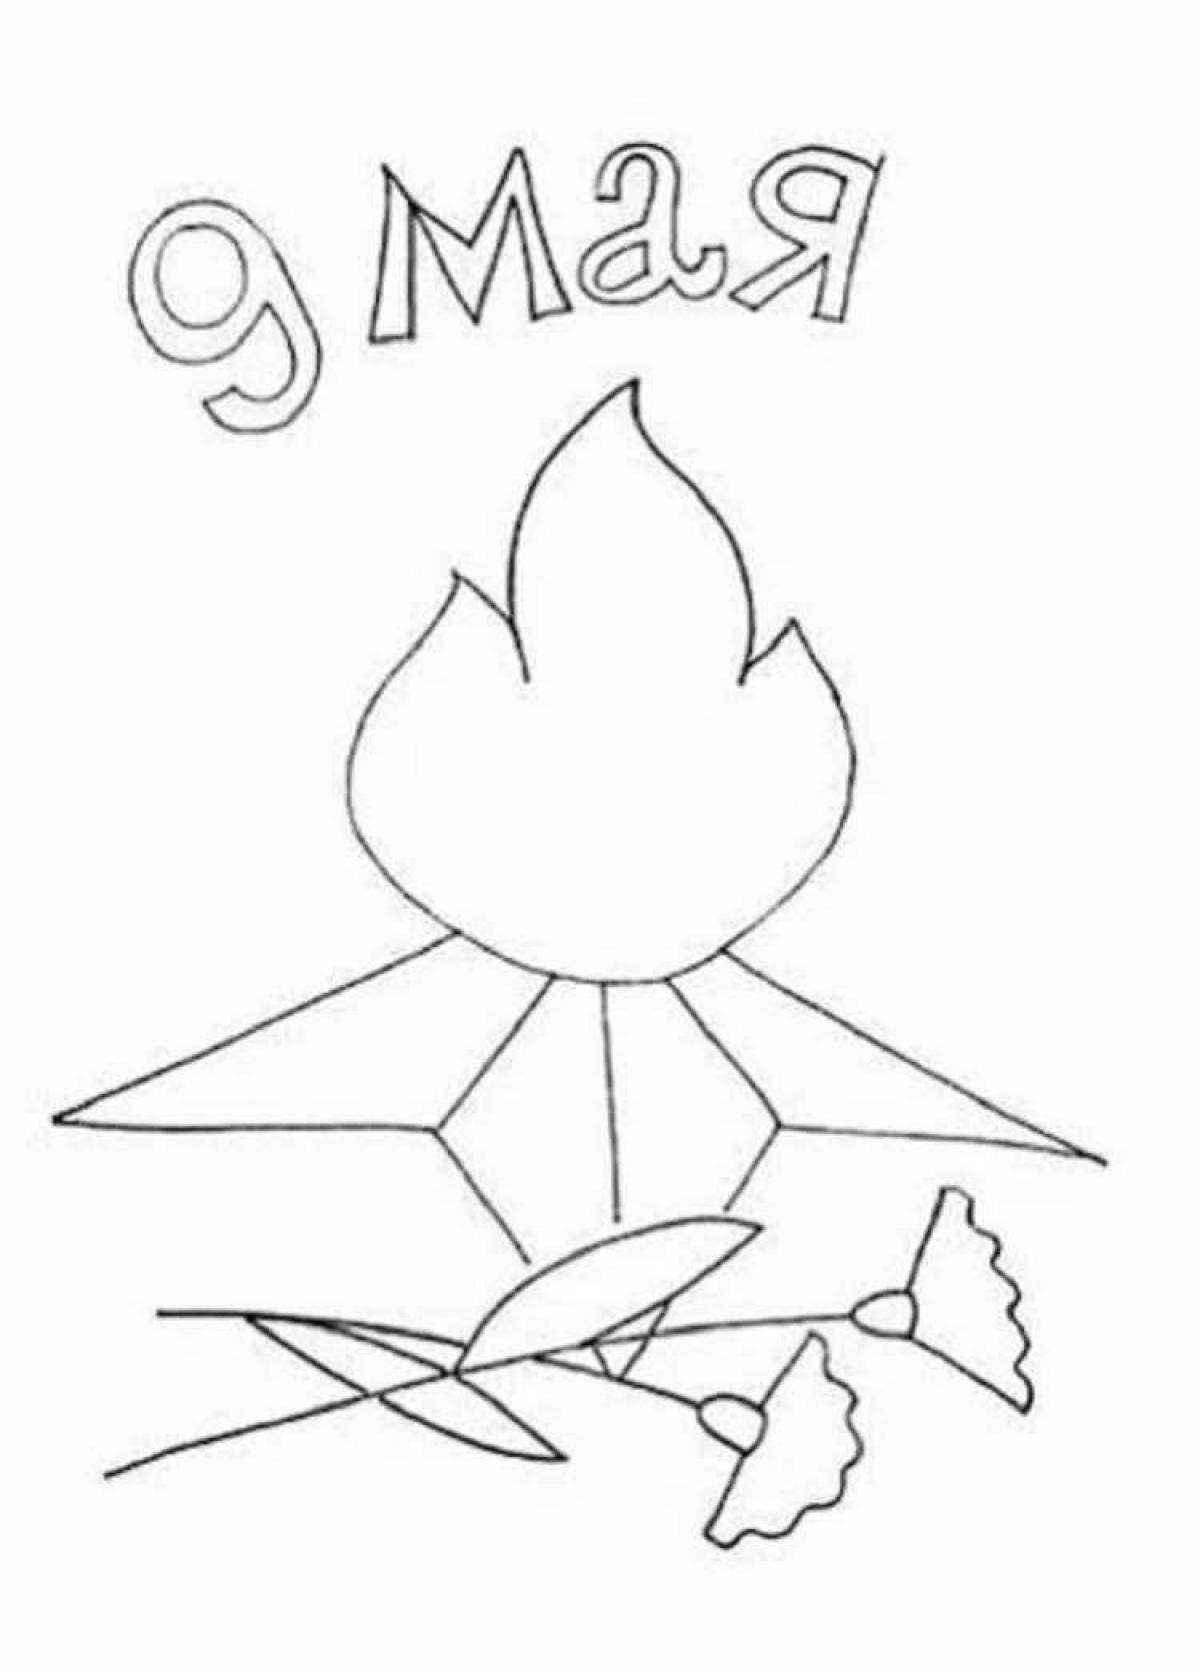 Attractive eternal flame coloring book for kids 5-6 years old